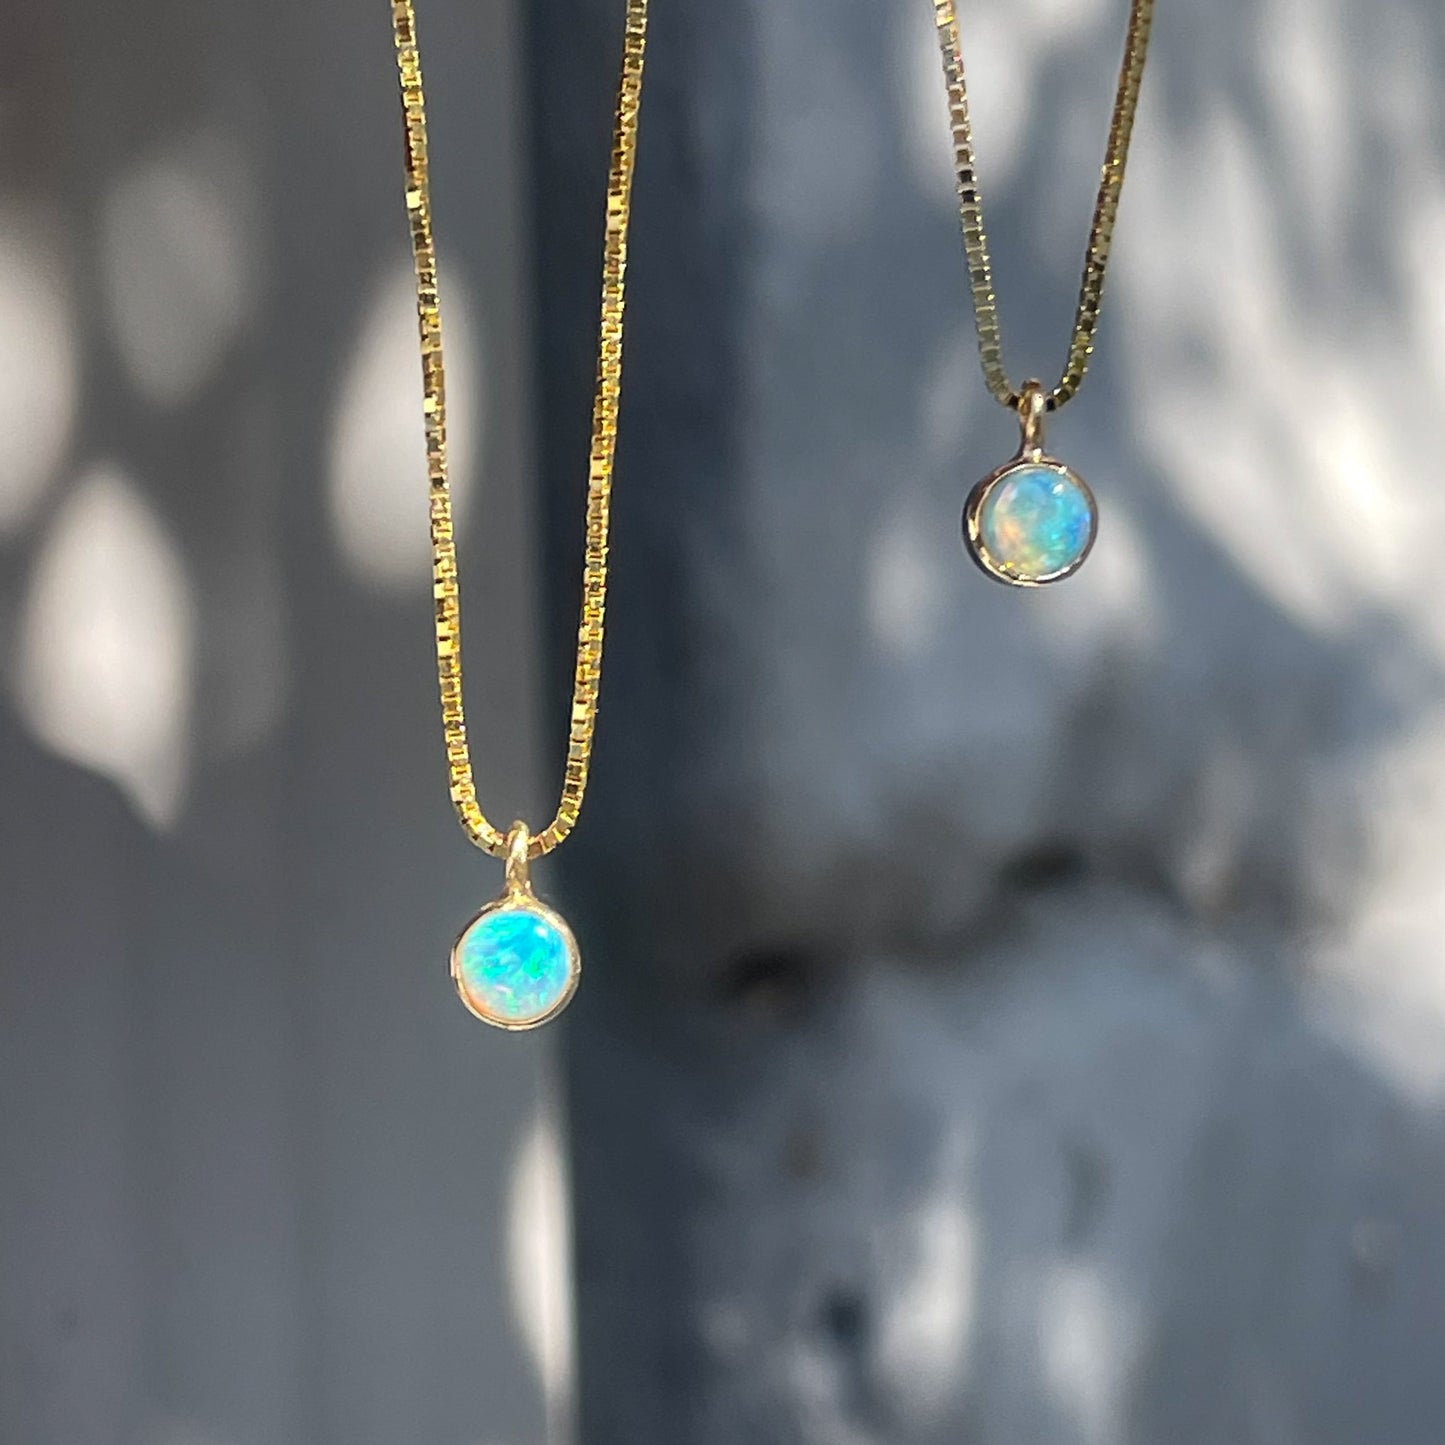 An Australian Opal Necklaces design by NIXIN Jewelry. Two of the opal necklaces hang in front of a grey wall with small blue opals in the pendants.